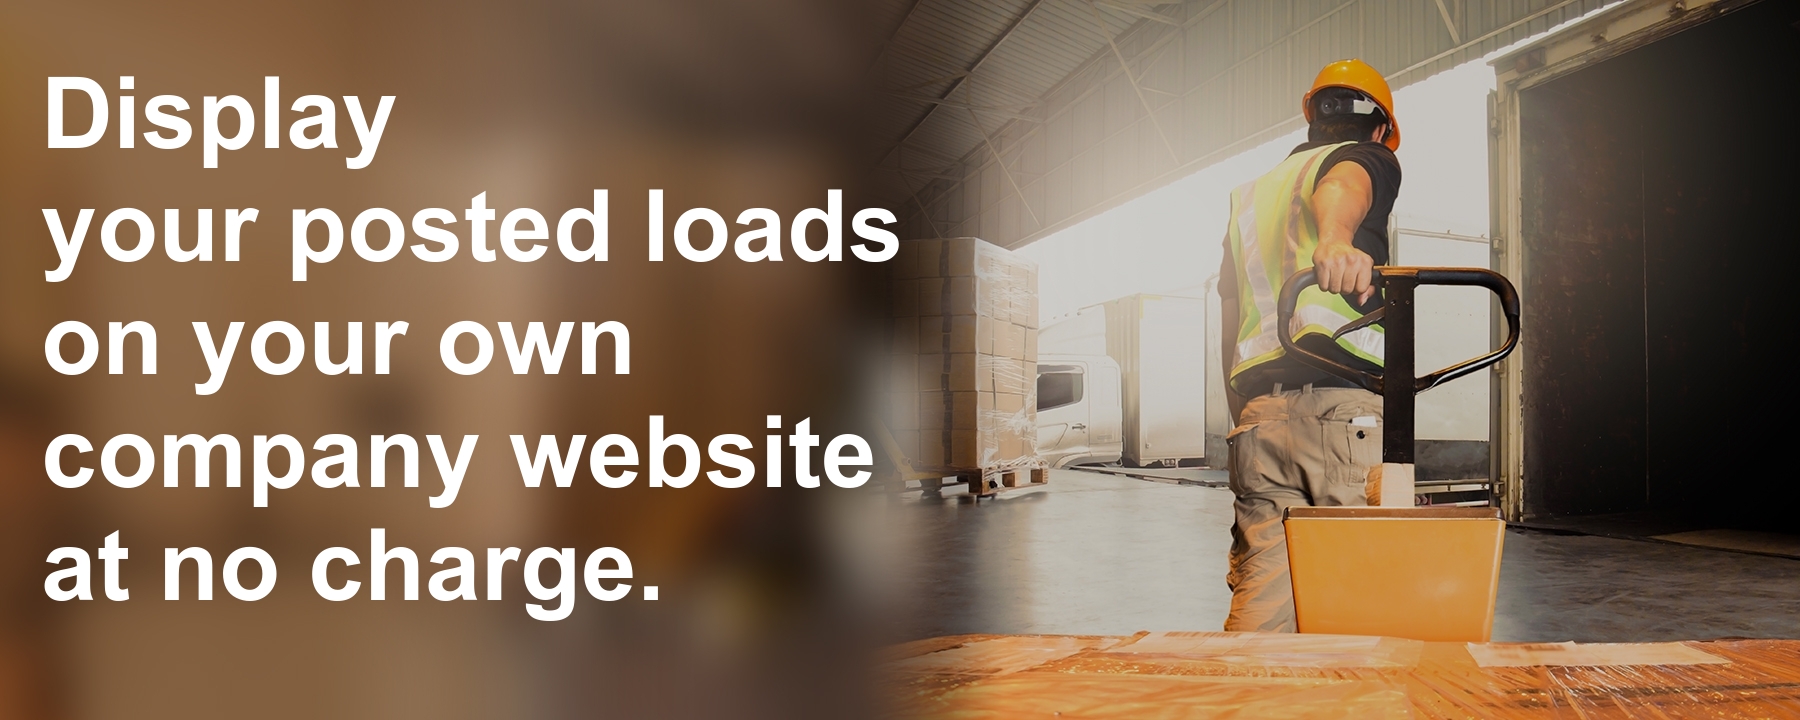 Display your posted loads on your own company website in real-time at no monthly charge.